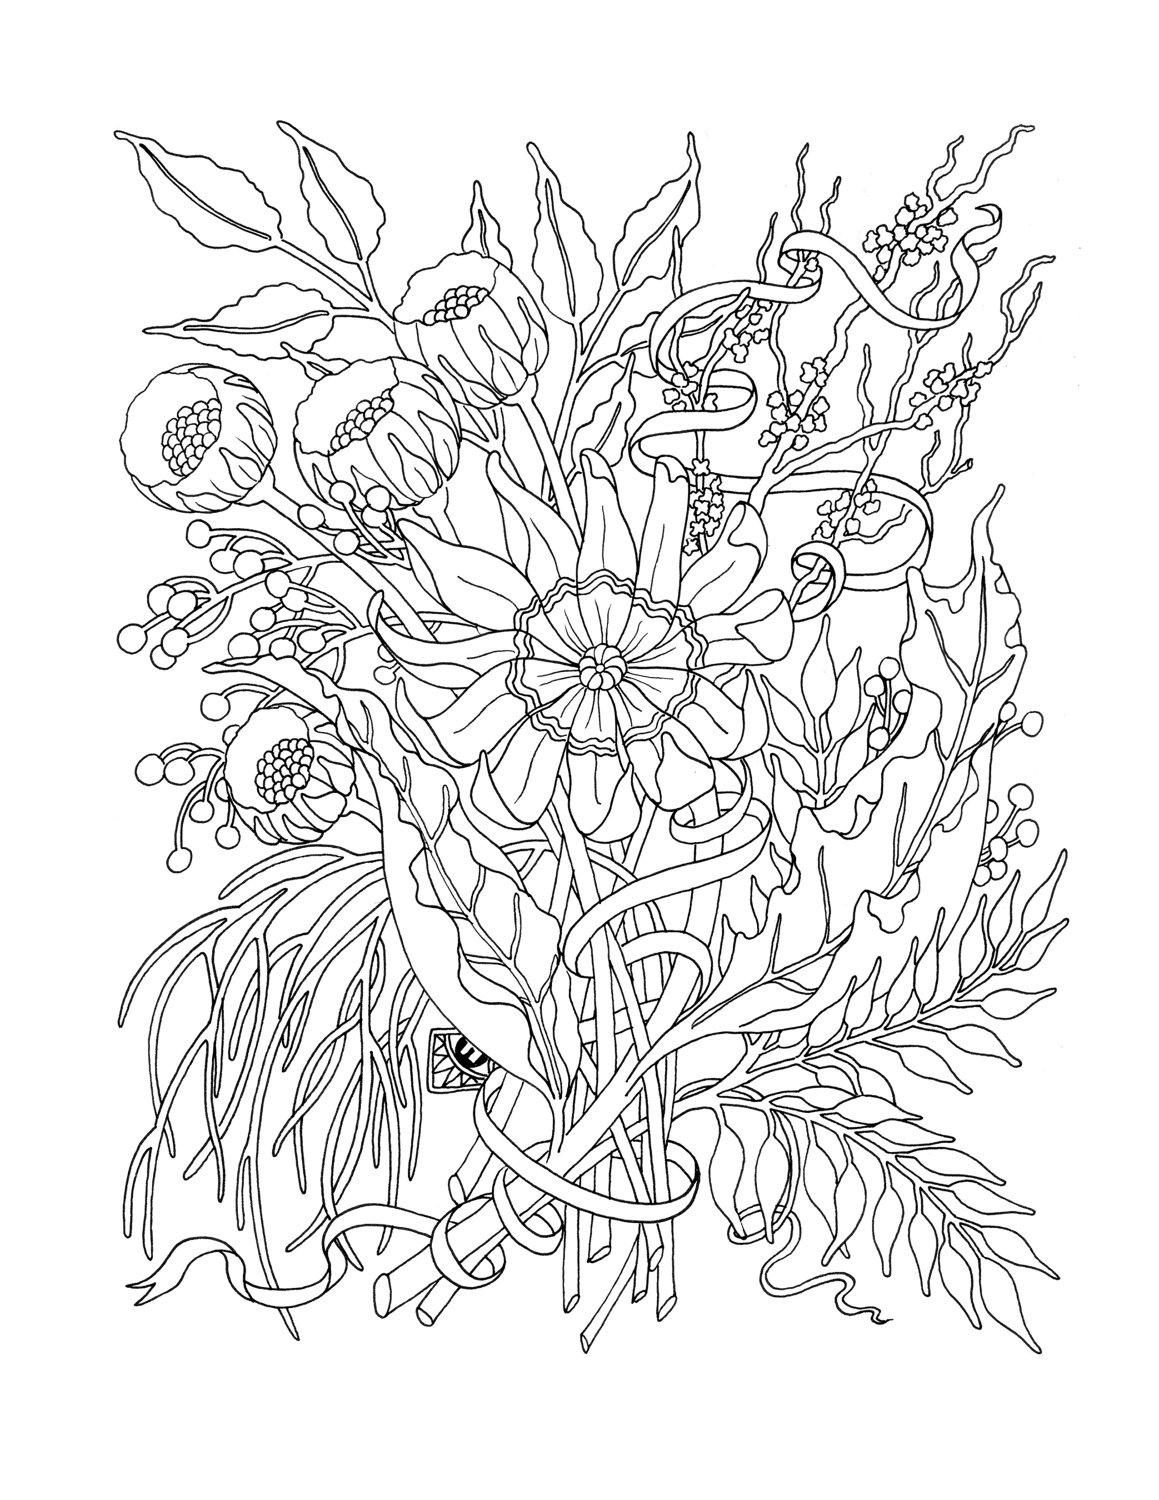 Bunch Of Flowers Coloring Page